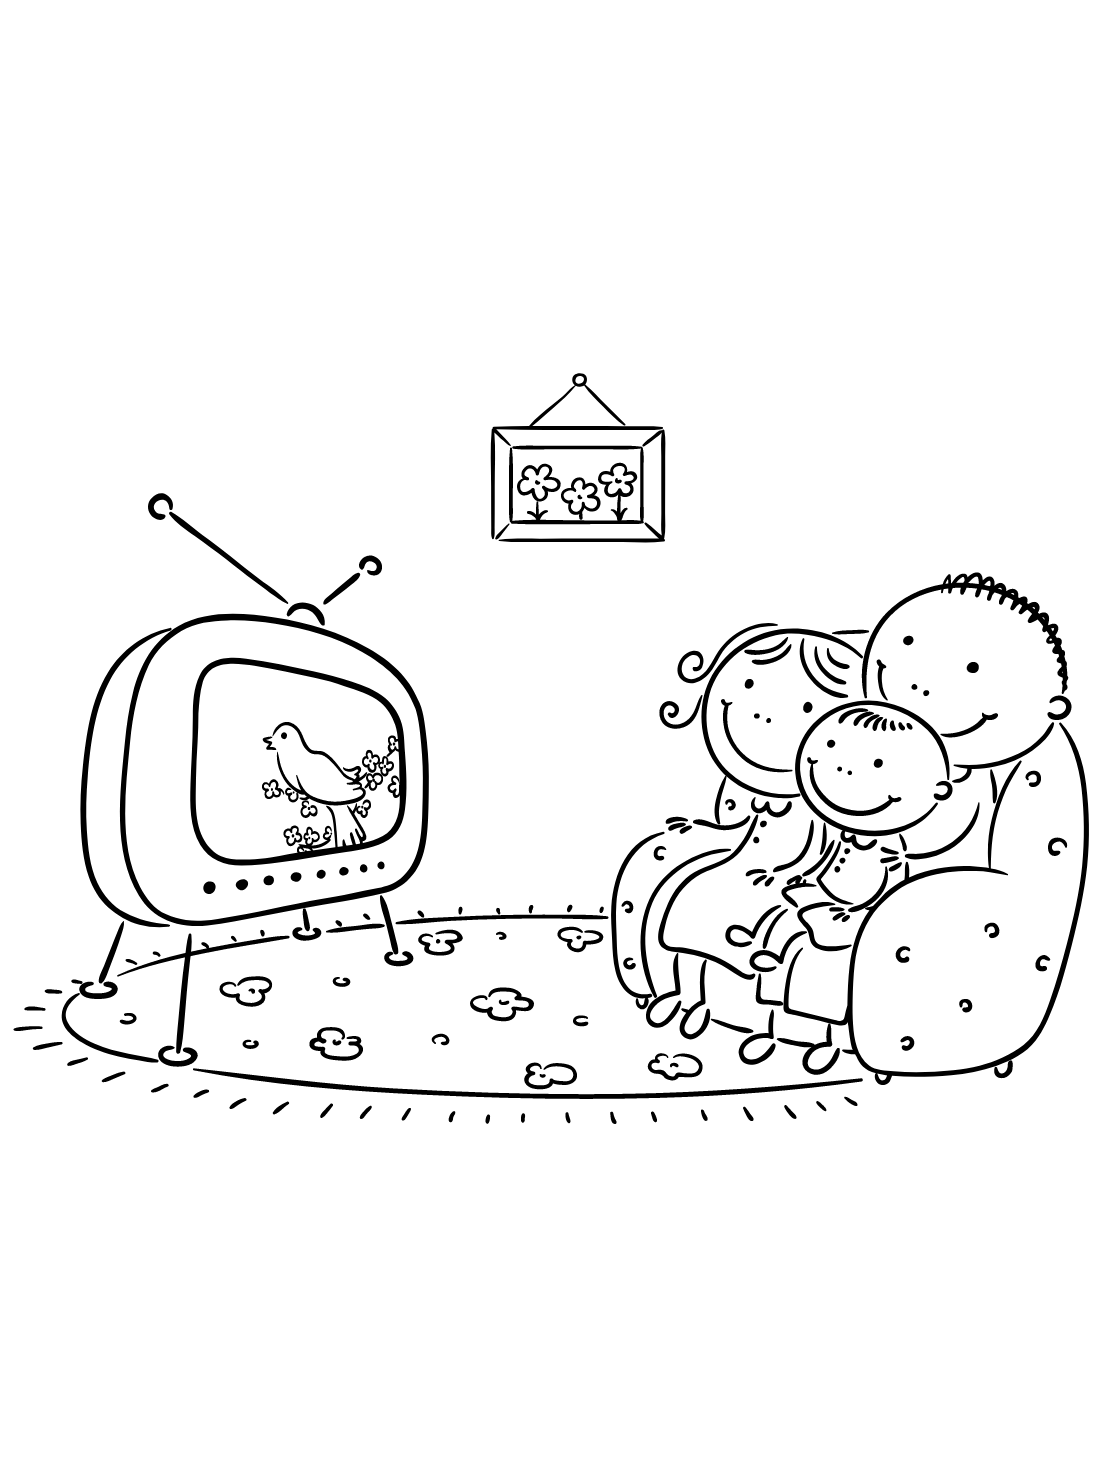 Family watching TV coloring pages